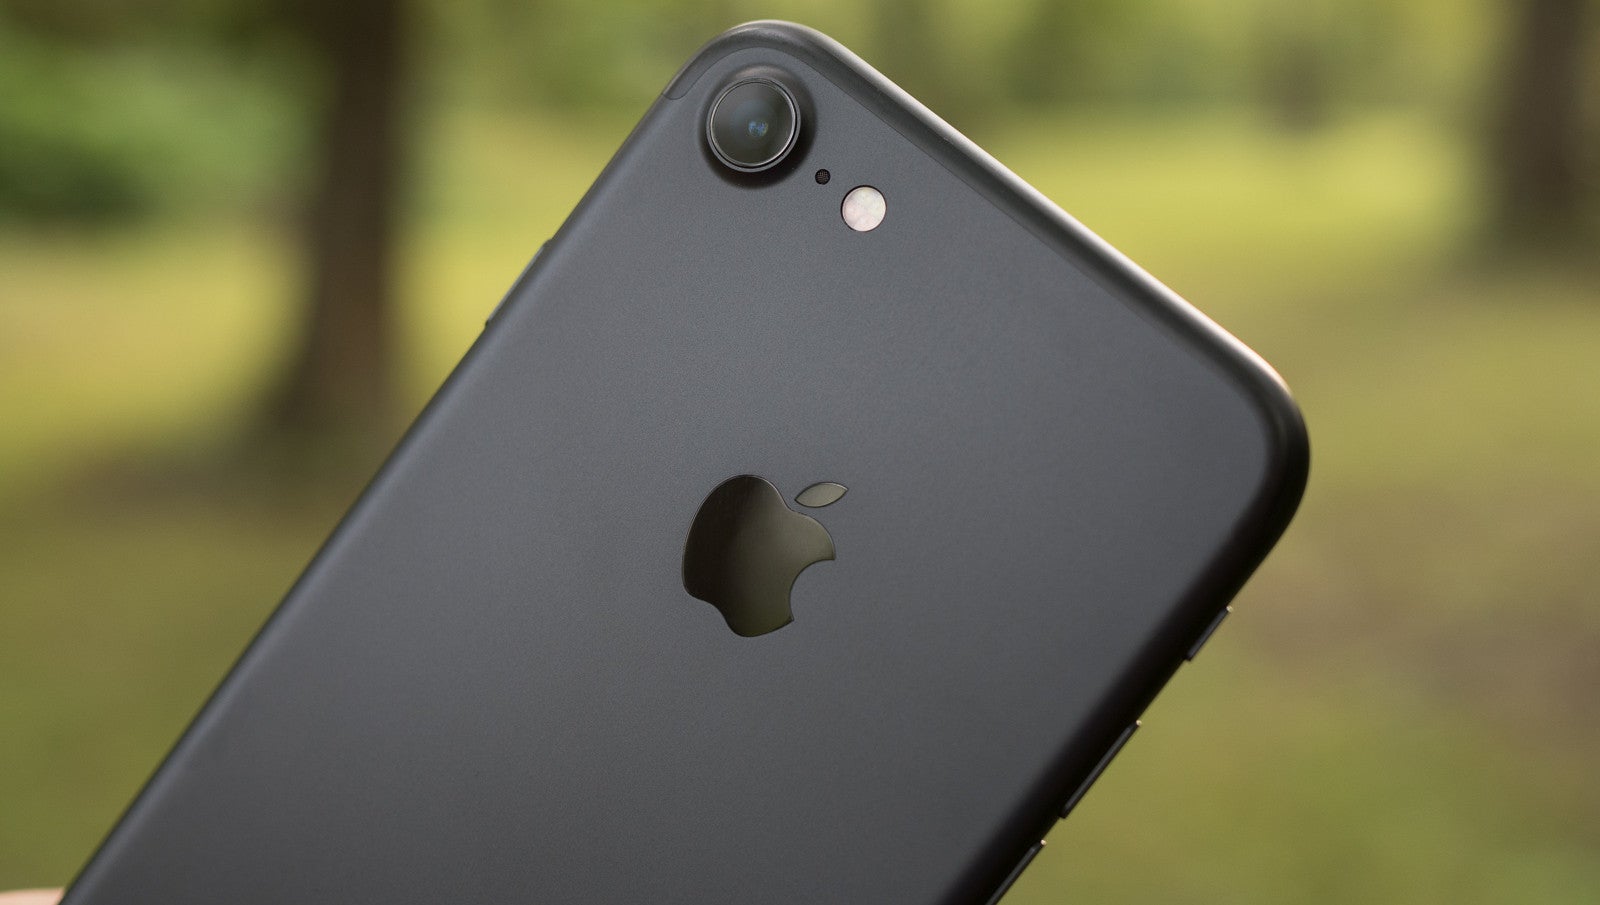 Sprint launches BOGO deal on iPhone 7, but you can only lease the phones